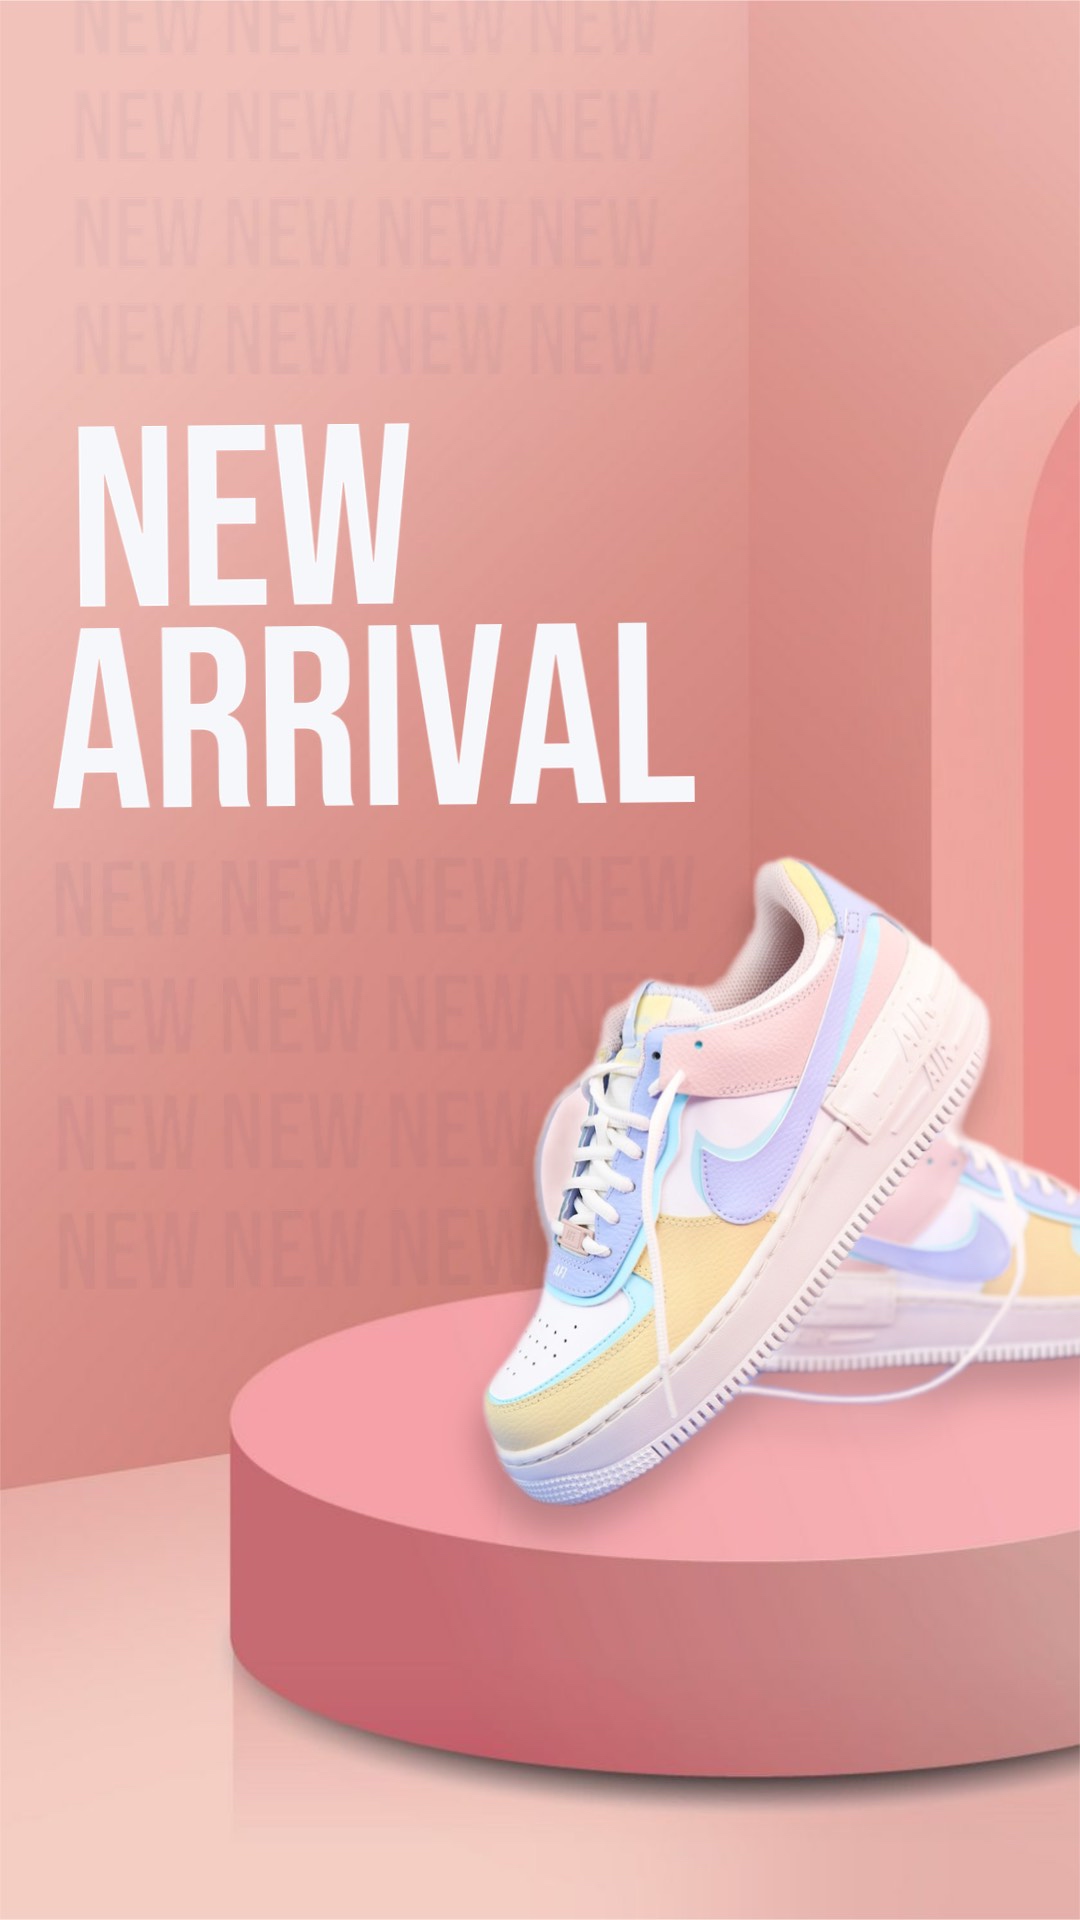 magic shoes product mockup instagram story template 